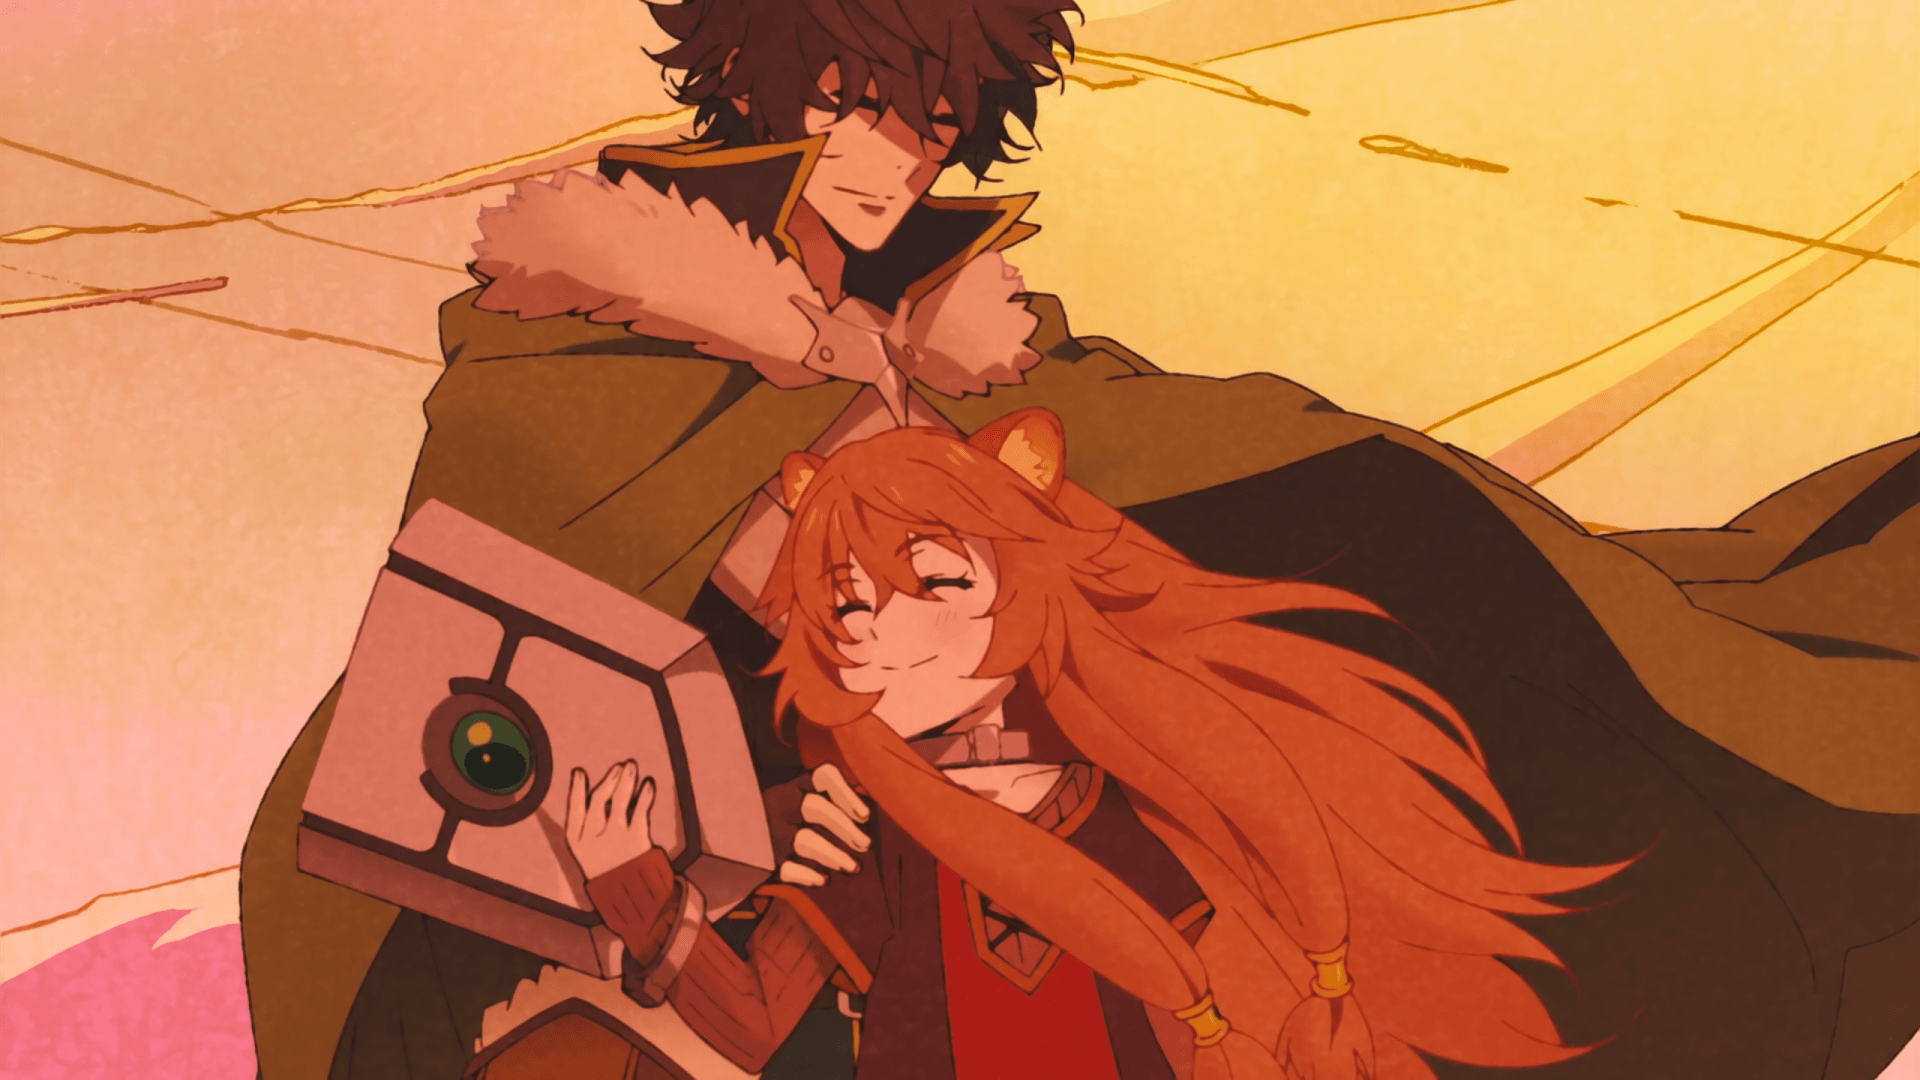 The Rising of the Shield Hero Wallpaper Background Image. View, download, comment, and rate. Hero wallpaper, Anime, Anime songs